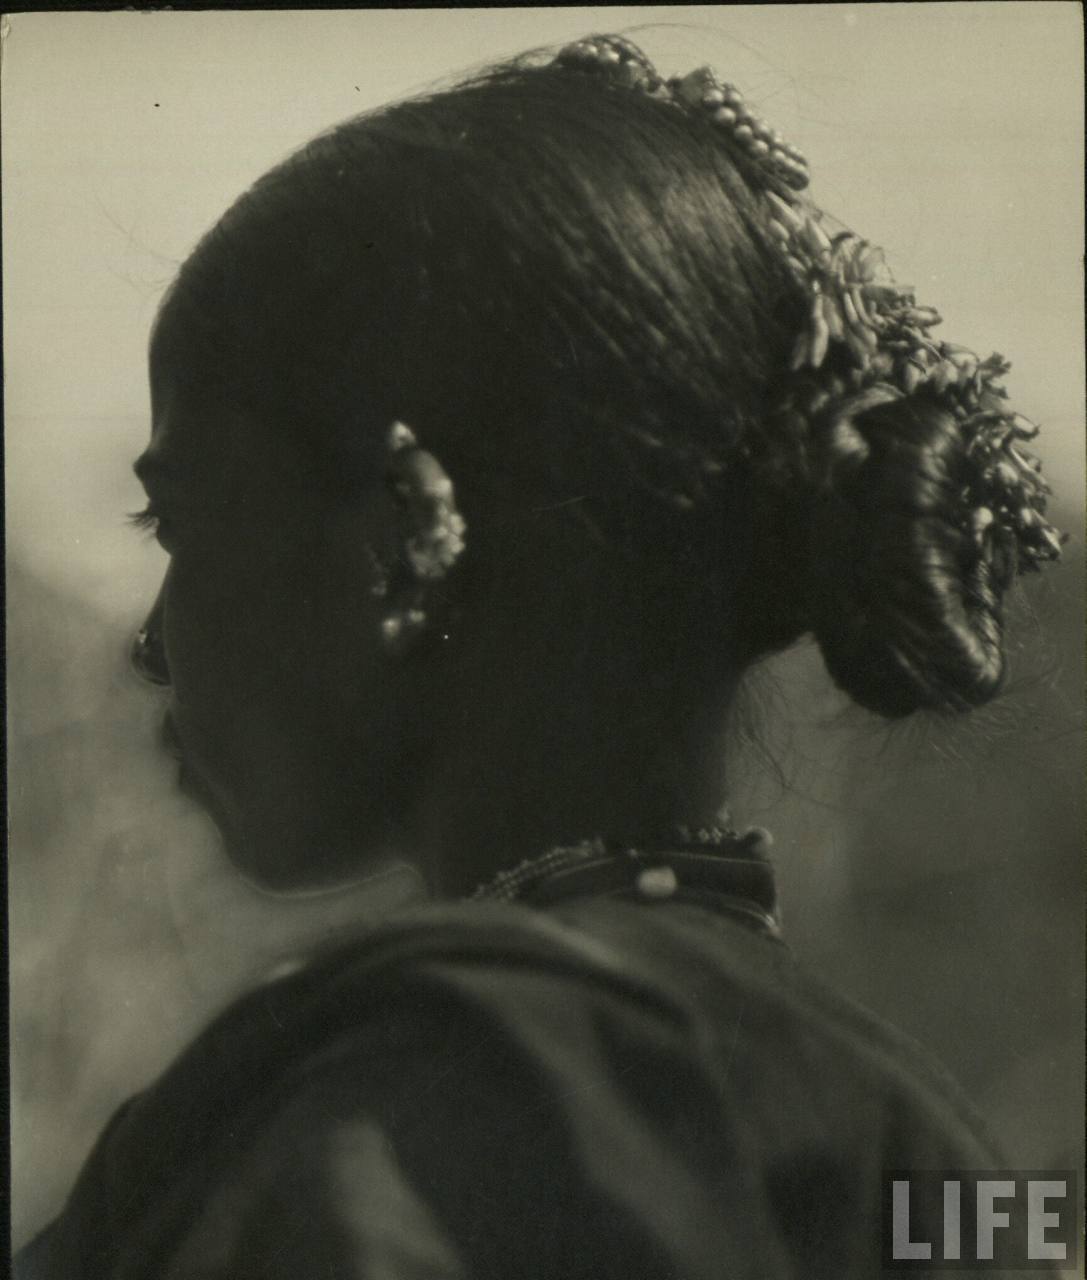 Hair decoration of an Indian Tribal Woman